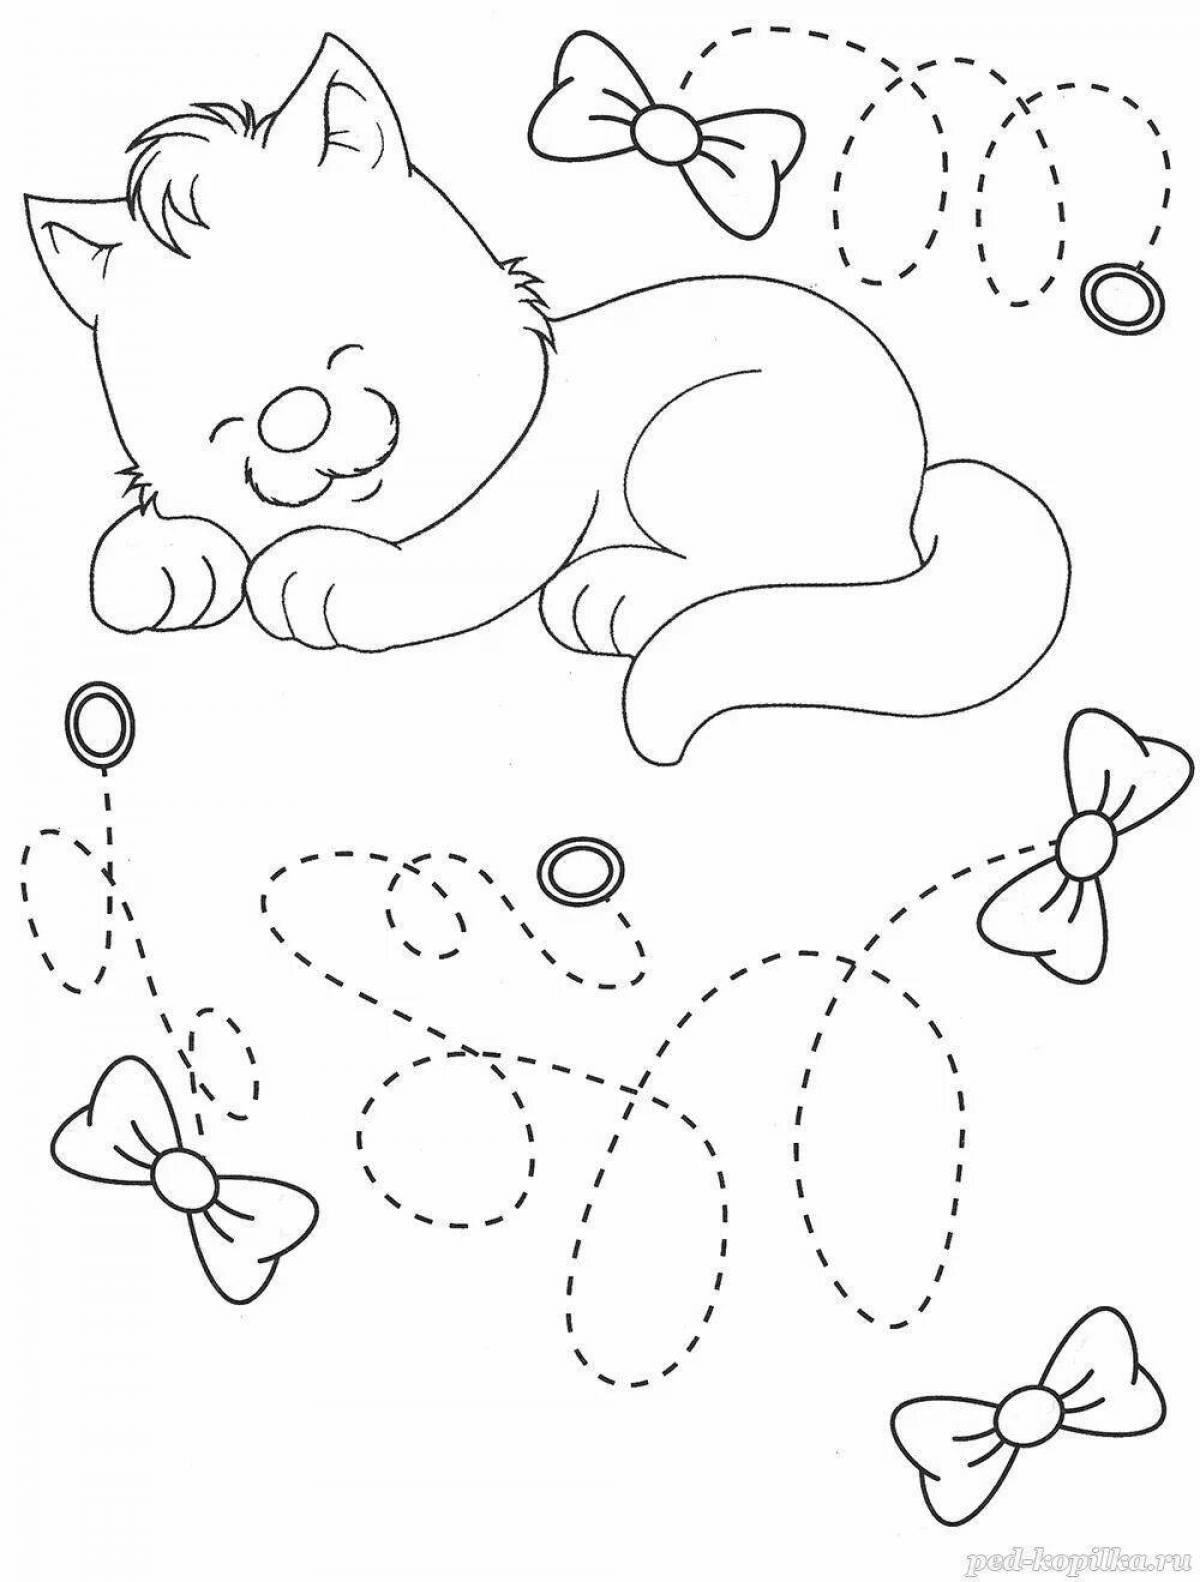 Bright coloring page 6 years of development